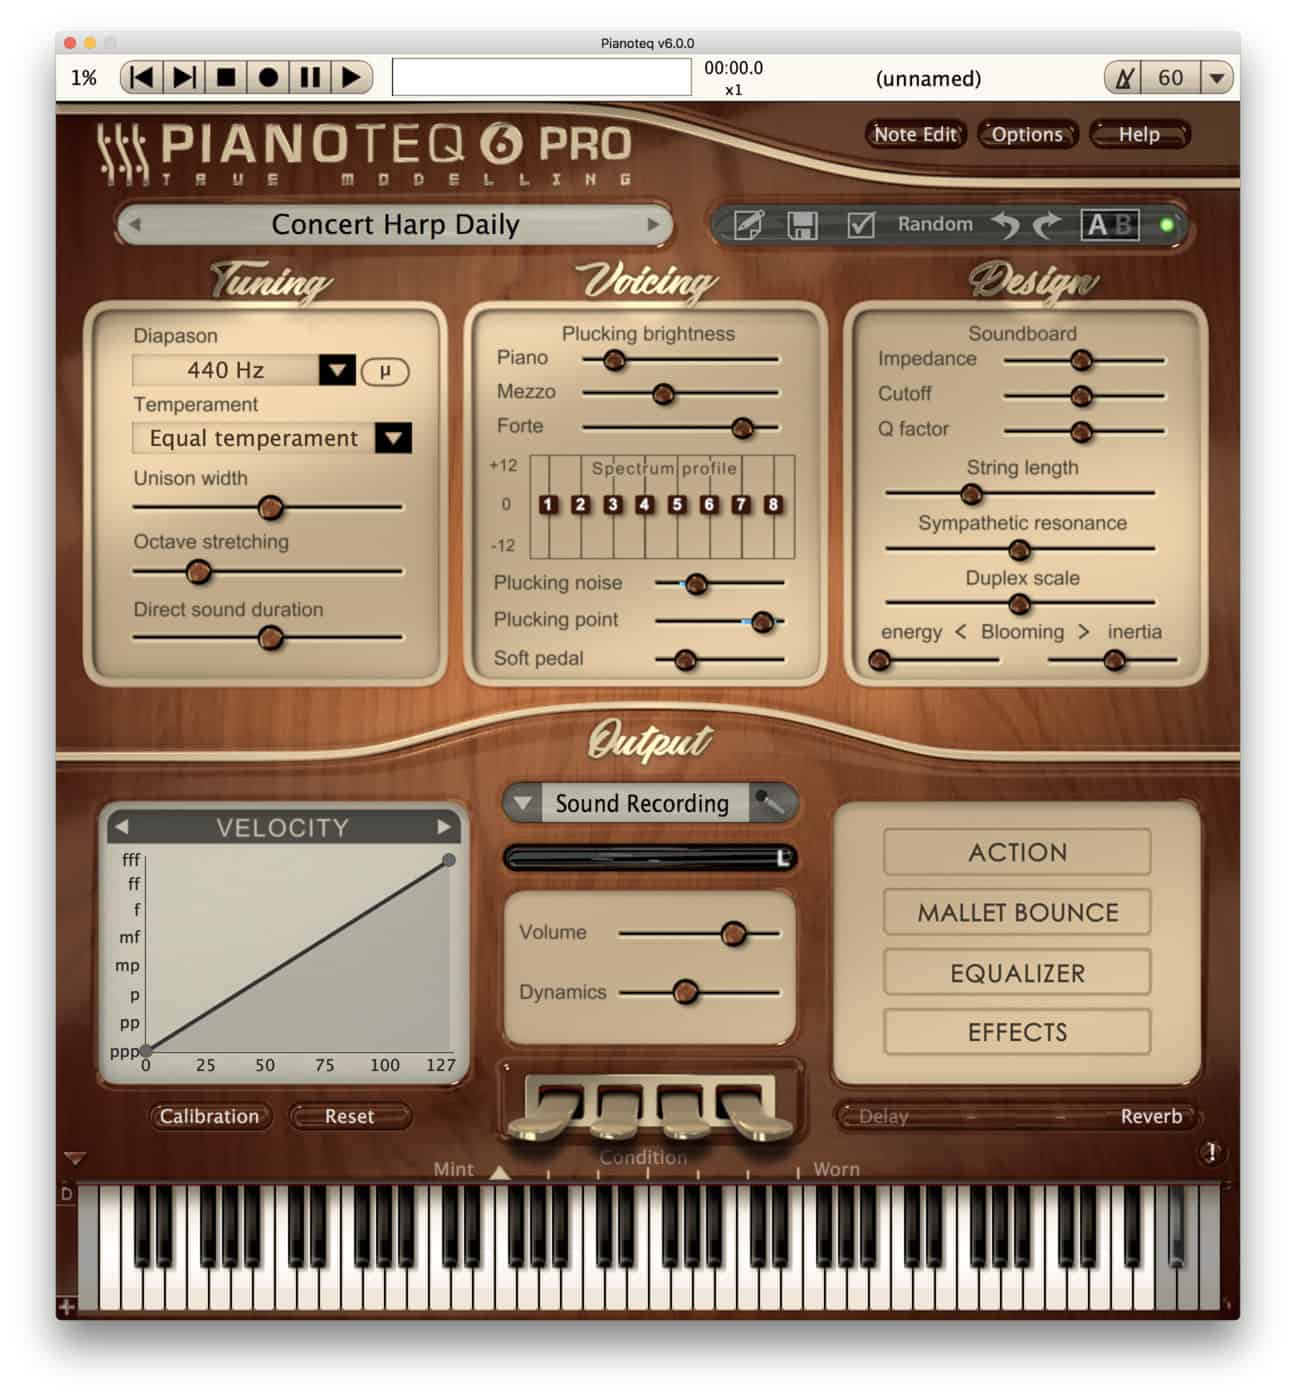 Celtic Harp for Pianoteq released